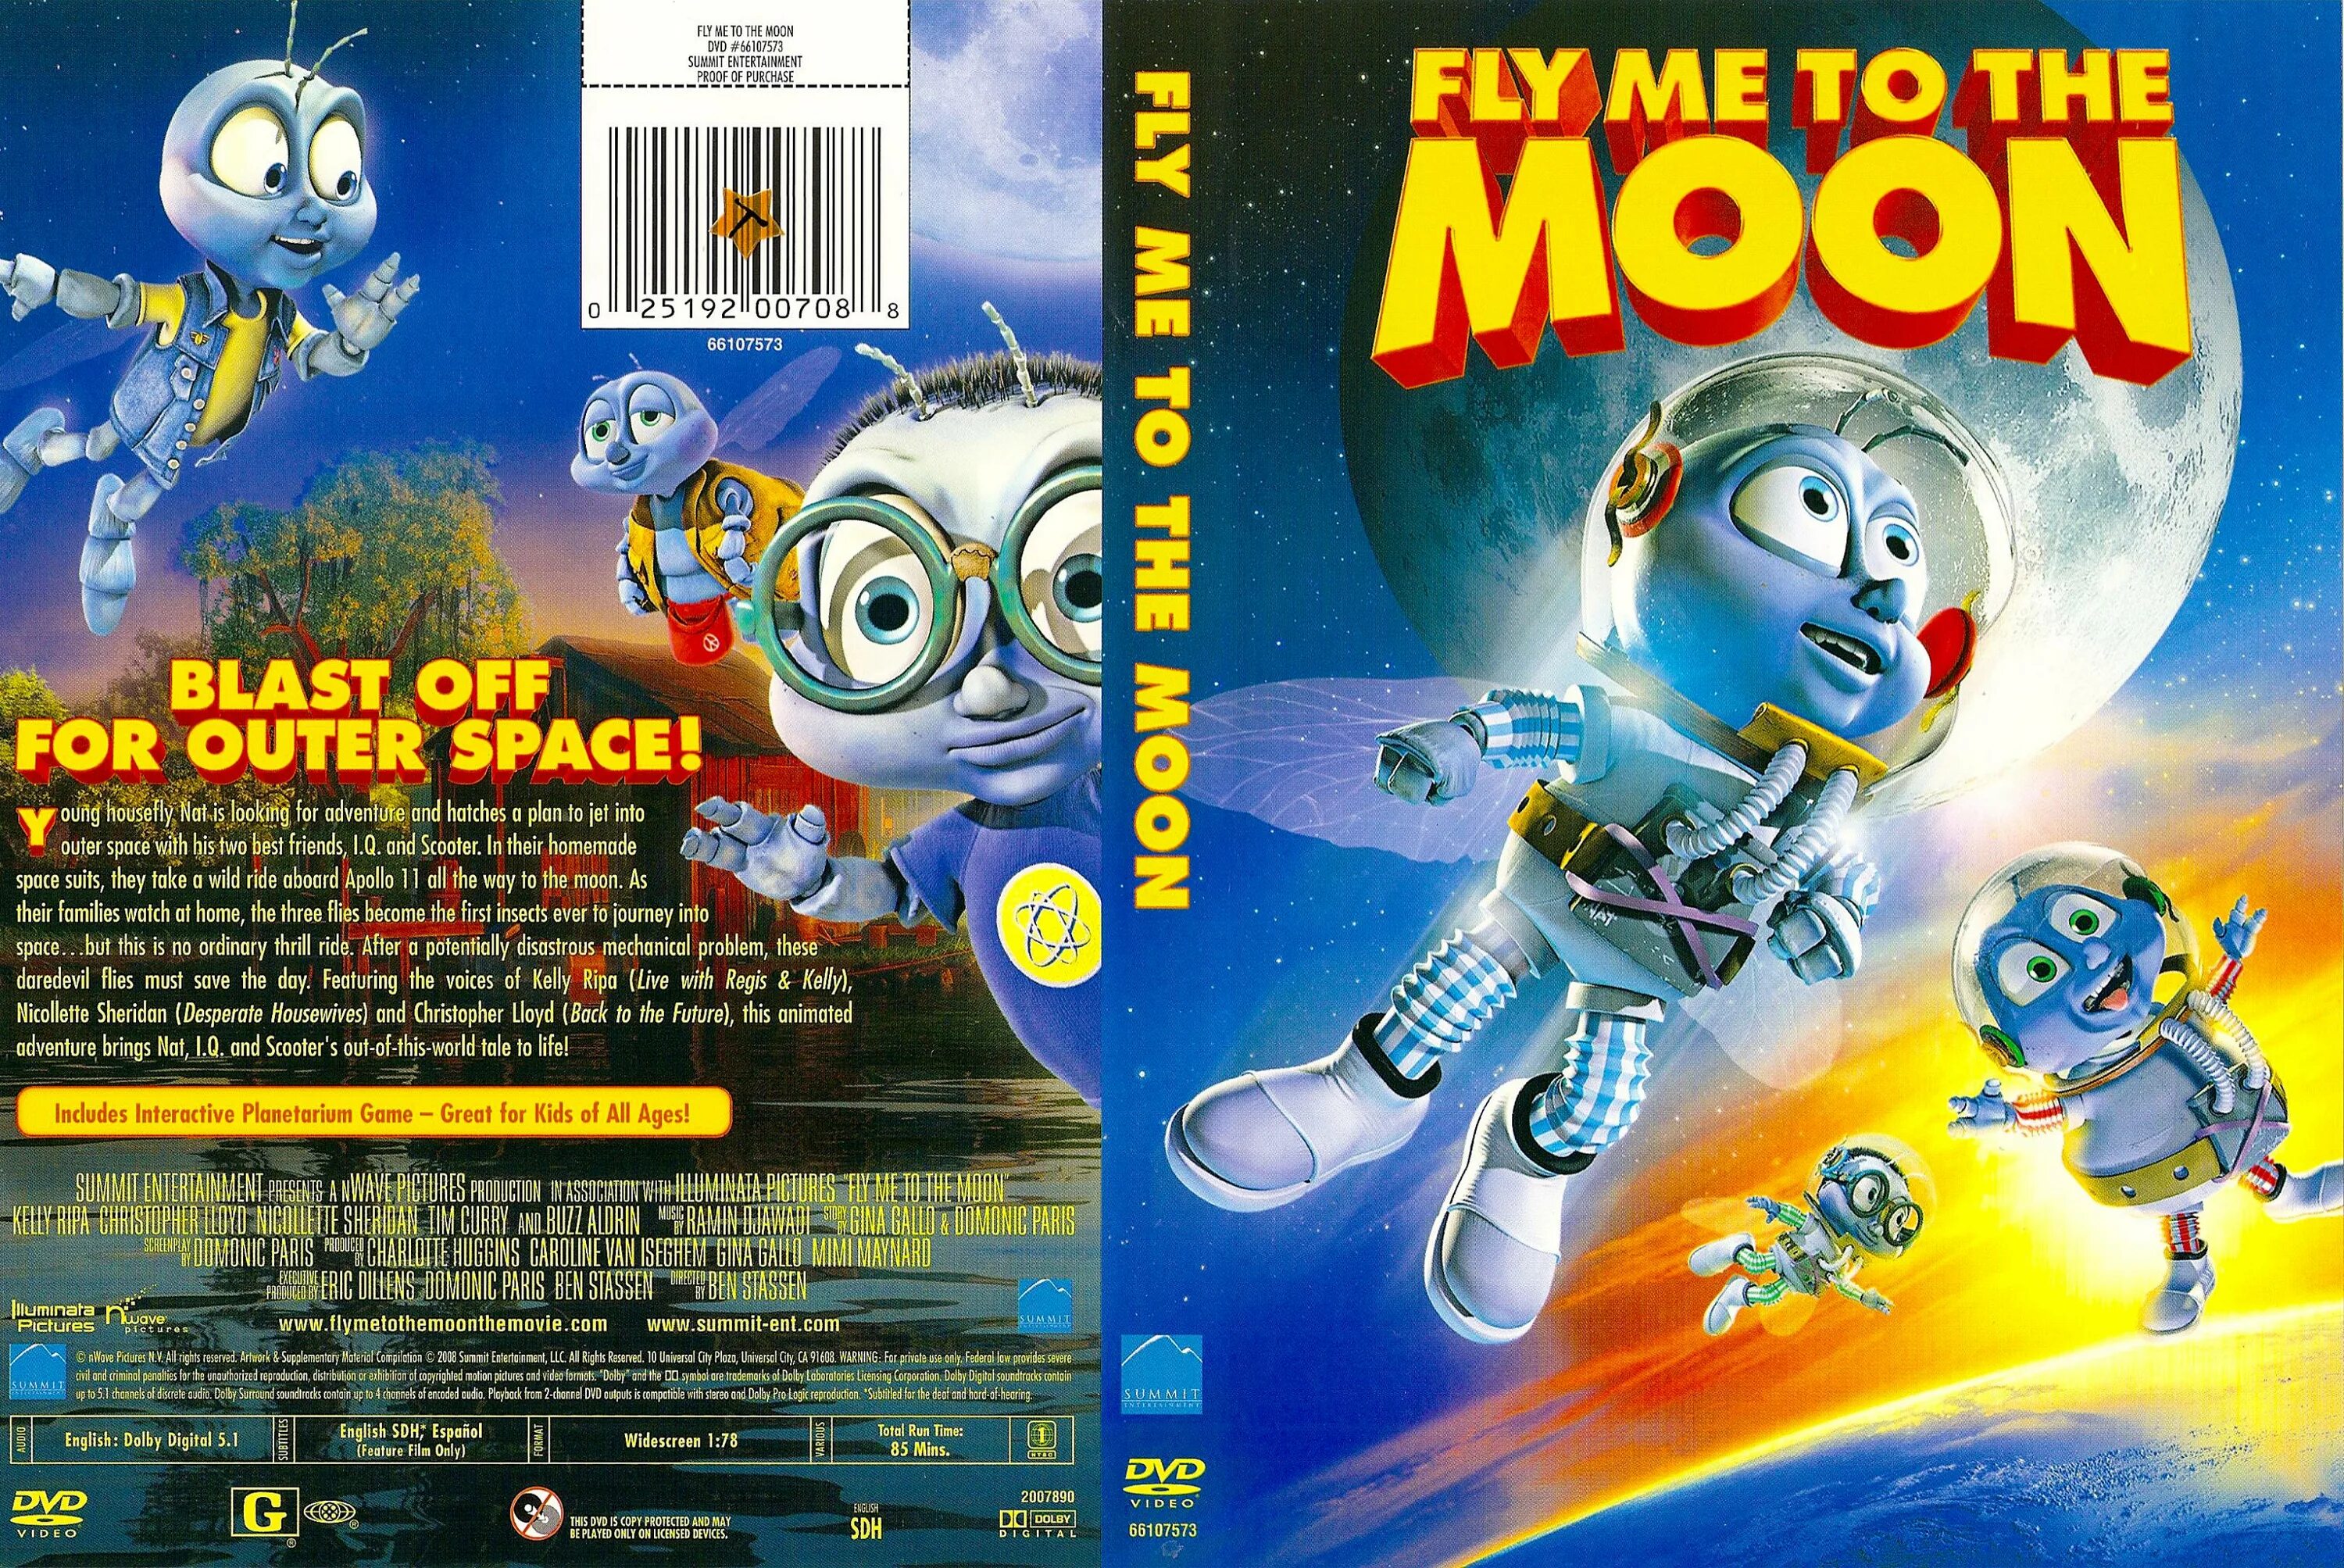 Fly the moon слушать. Fly me to the Moon 2008. Fly to the Moon игра. Диск DVD Мухнём на луну. Fly me to the Moon игра.